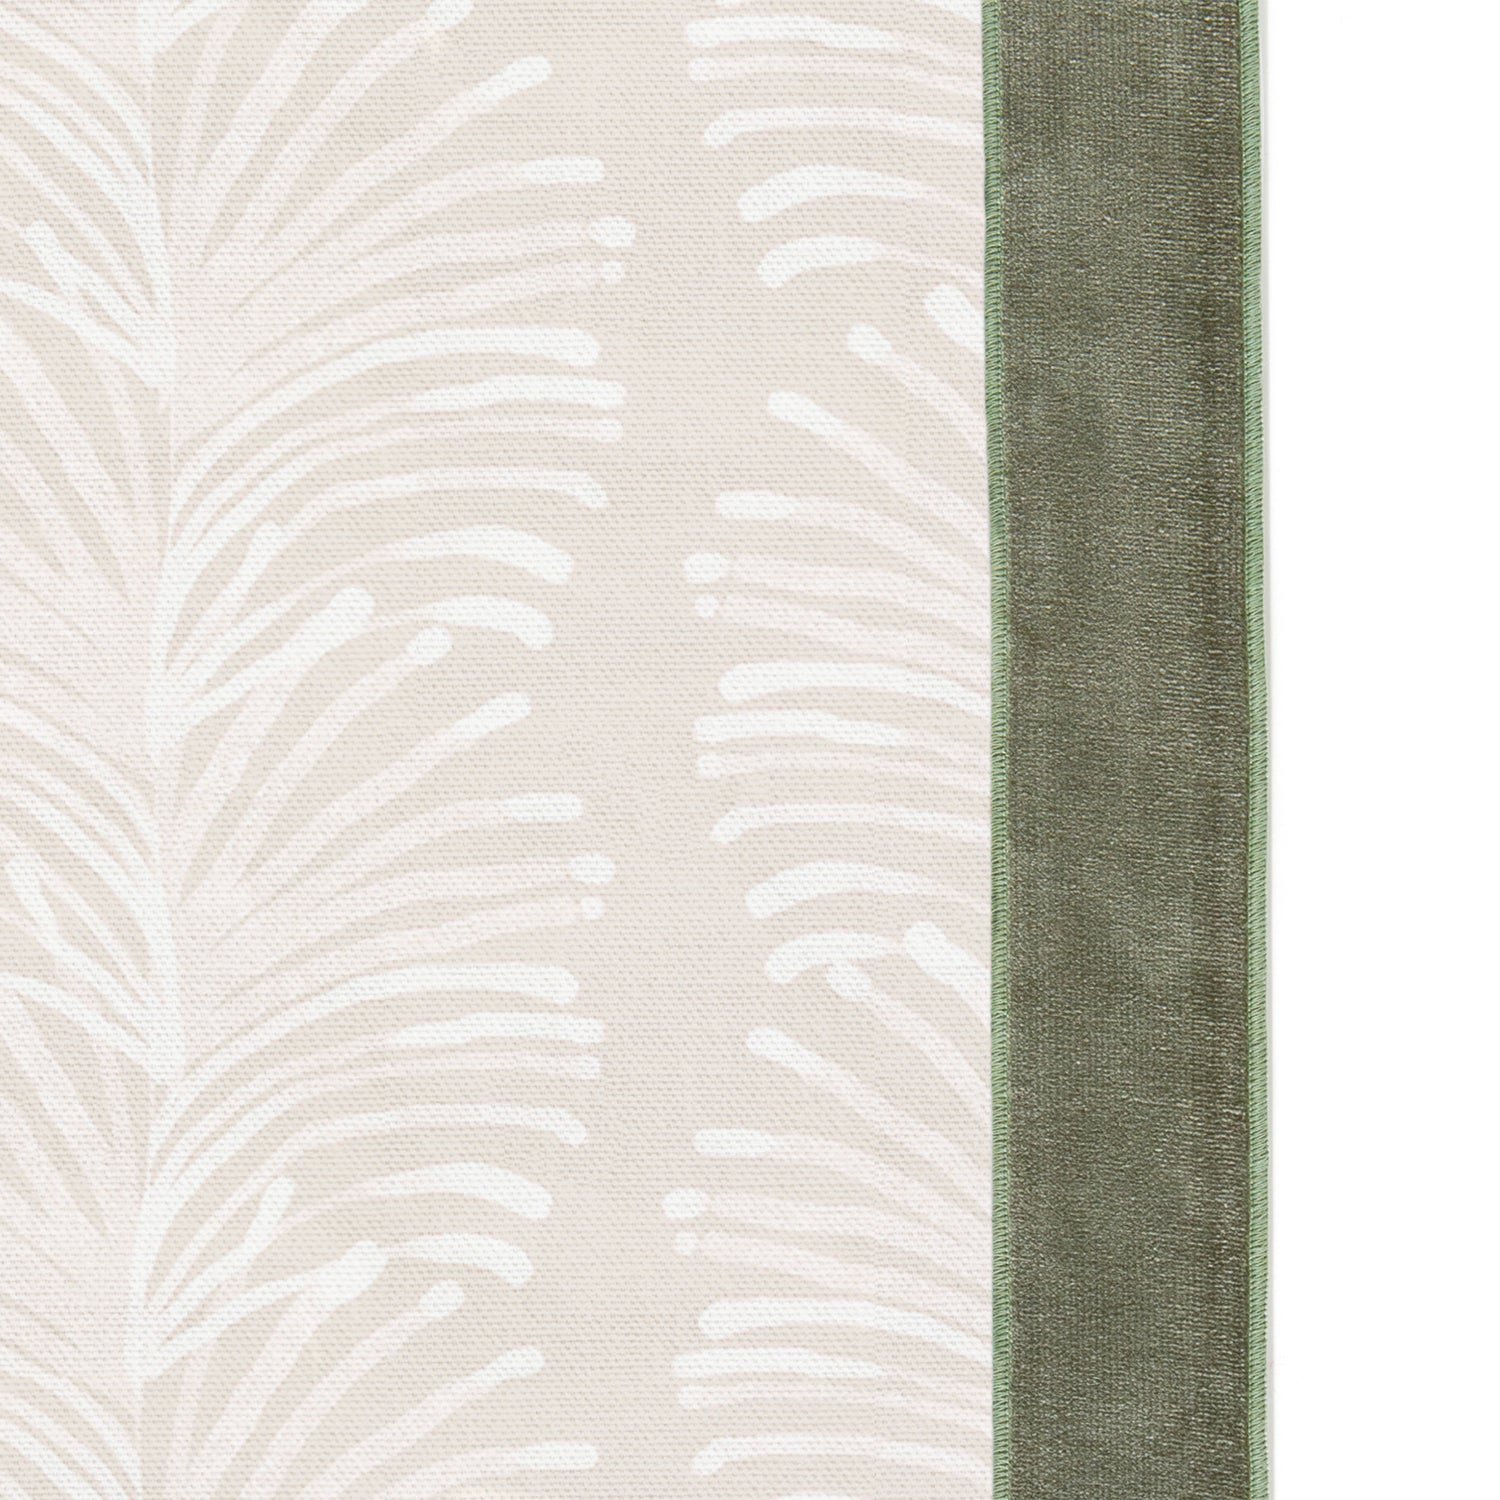 Upclose picture of Emma Sand custom Beige Botanical Stripecurtain with fern velvet band trim